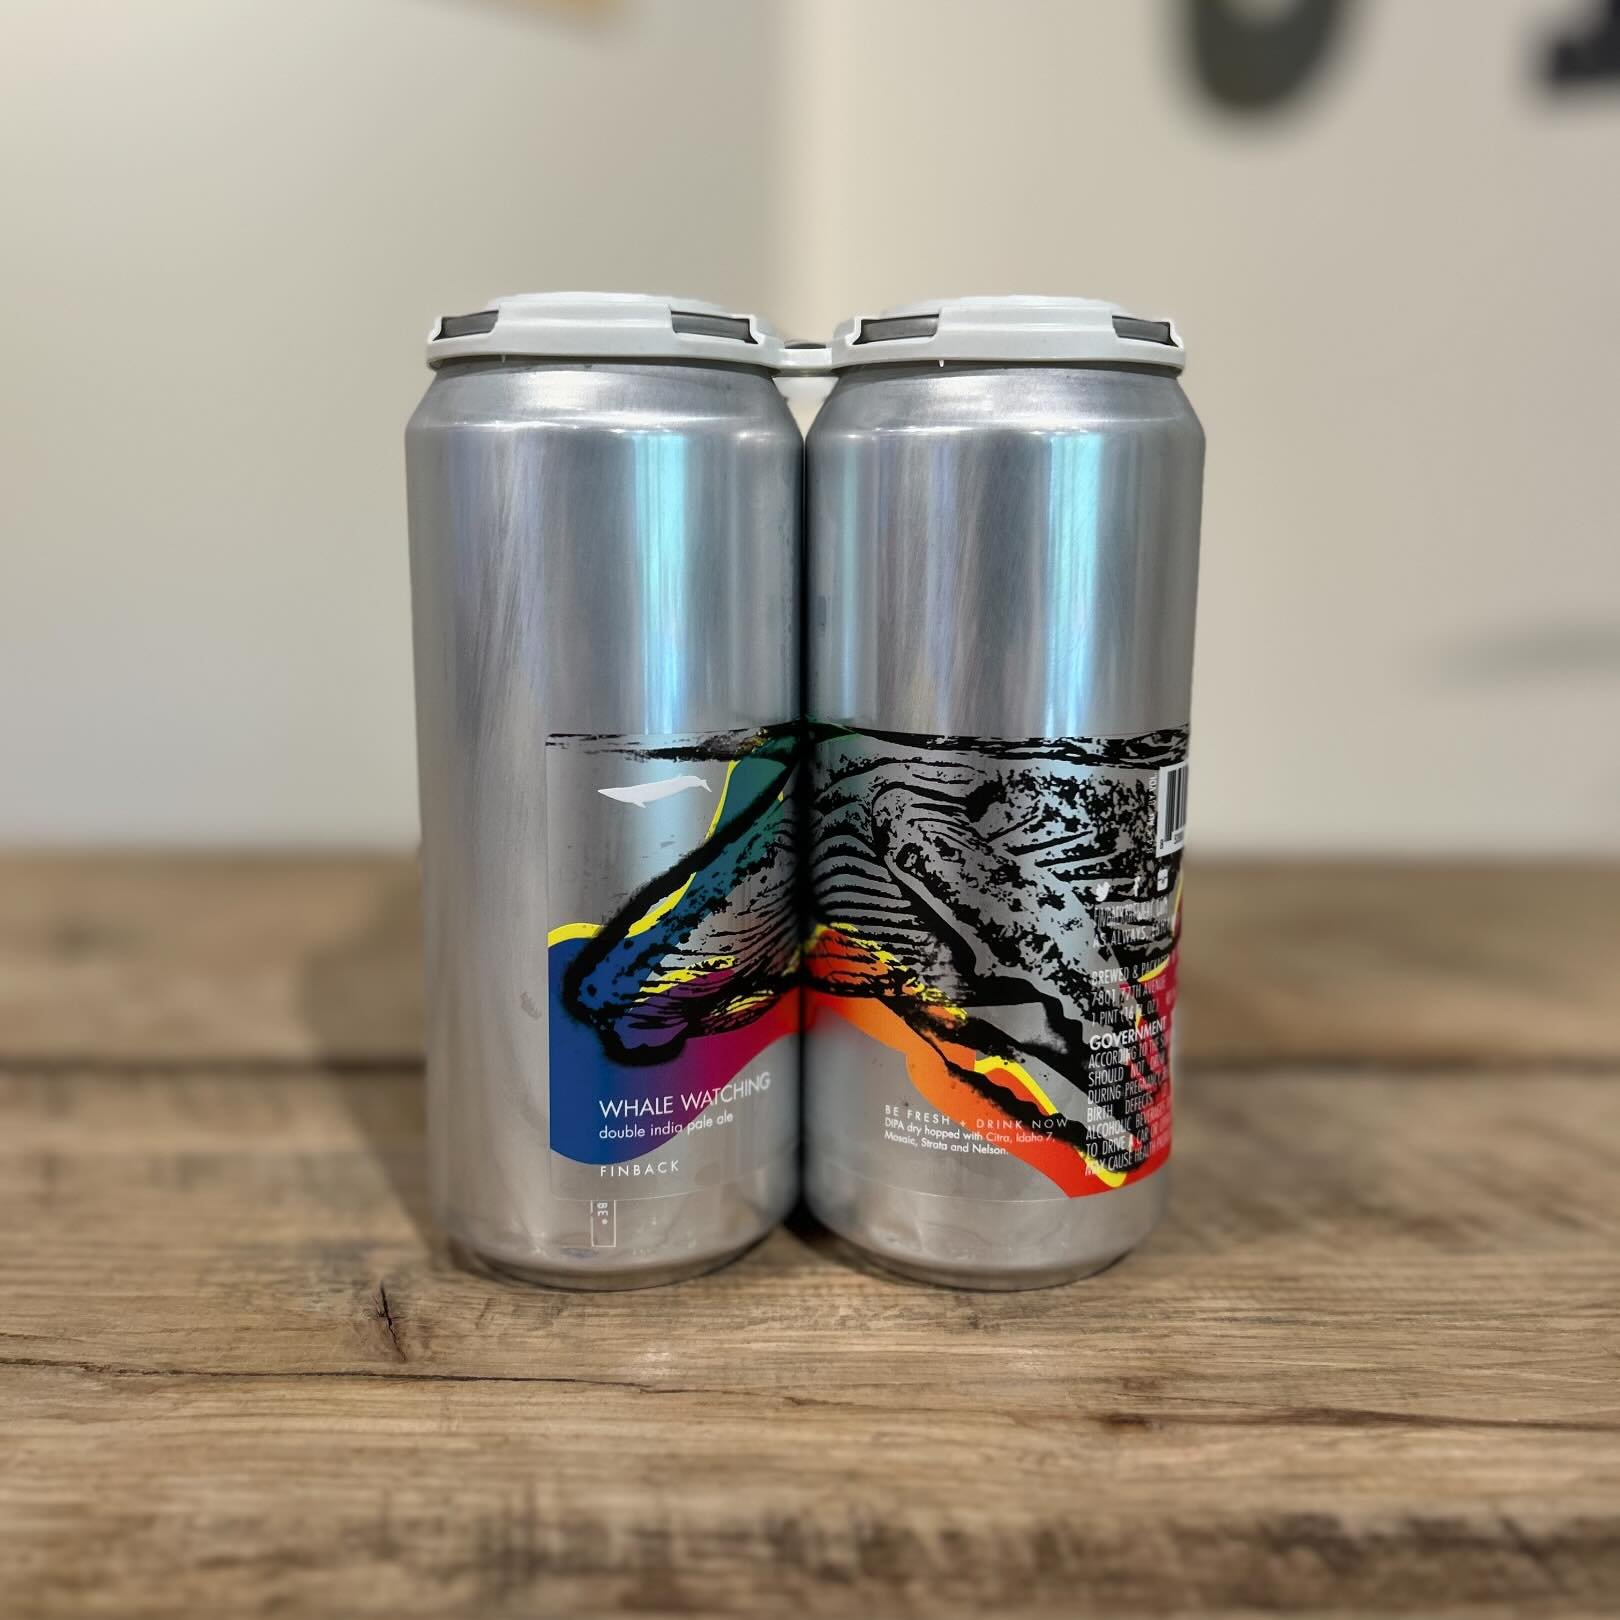 Fresh @finbackbrewery #NowAvailable #SudburyCraftBeer #FollowTheWhale
&mdash;
New label, same great beer.

Whale Watching, our house named Double IPA.

Hopped with Mosaic, Citra, Idaho 7, Strata and Nelson this dank DIPA combines the citrus of lemon 